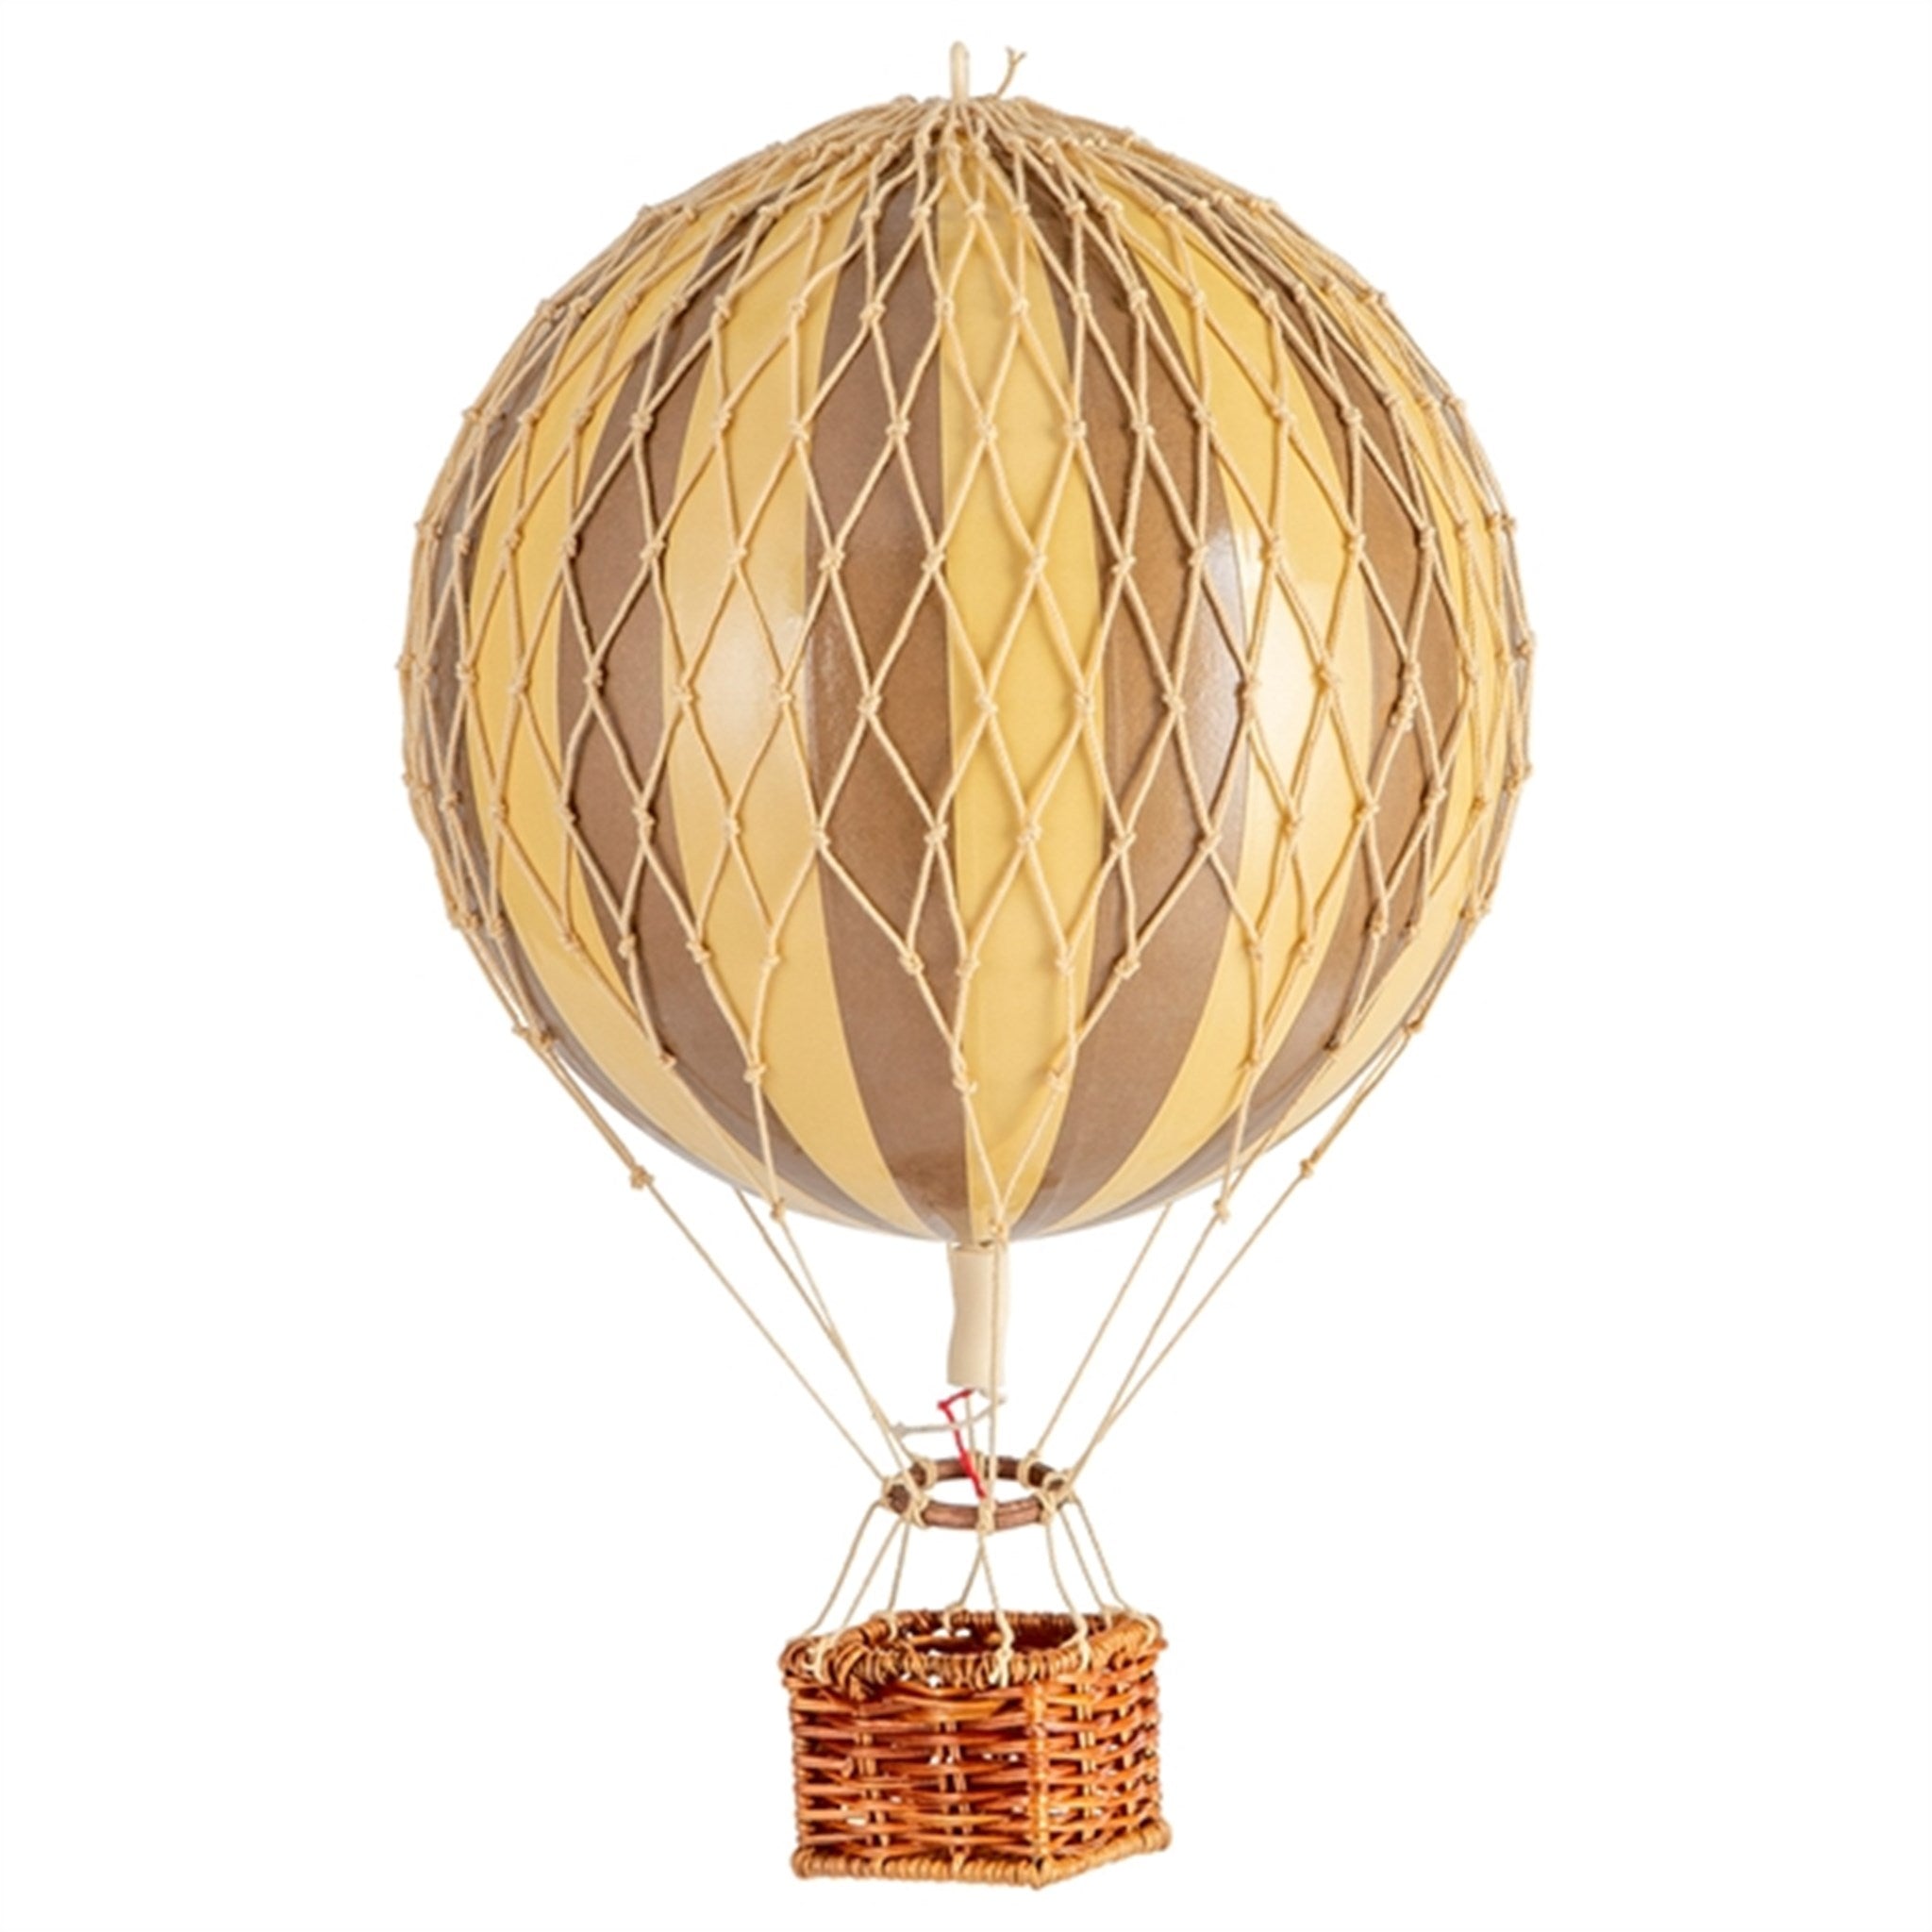 Authentic Models Balloon Gold Ivory 18 cm